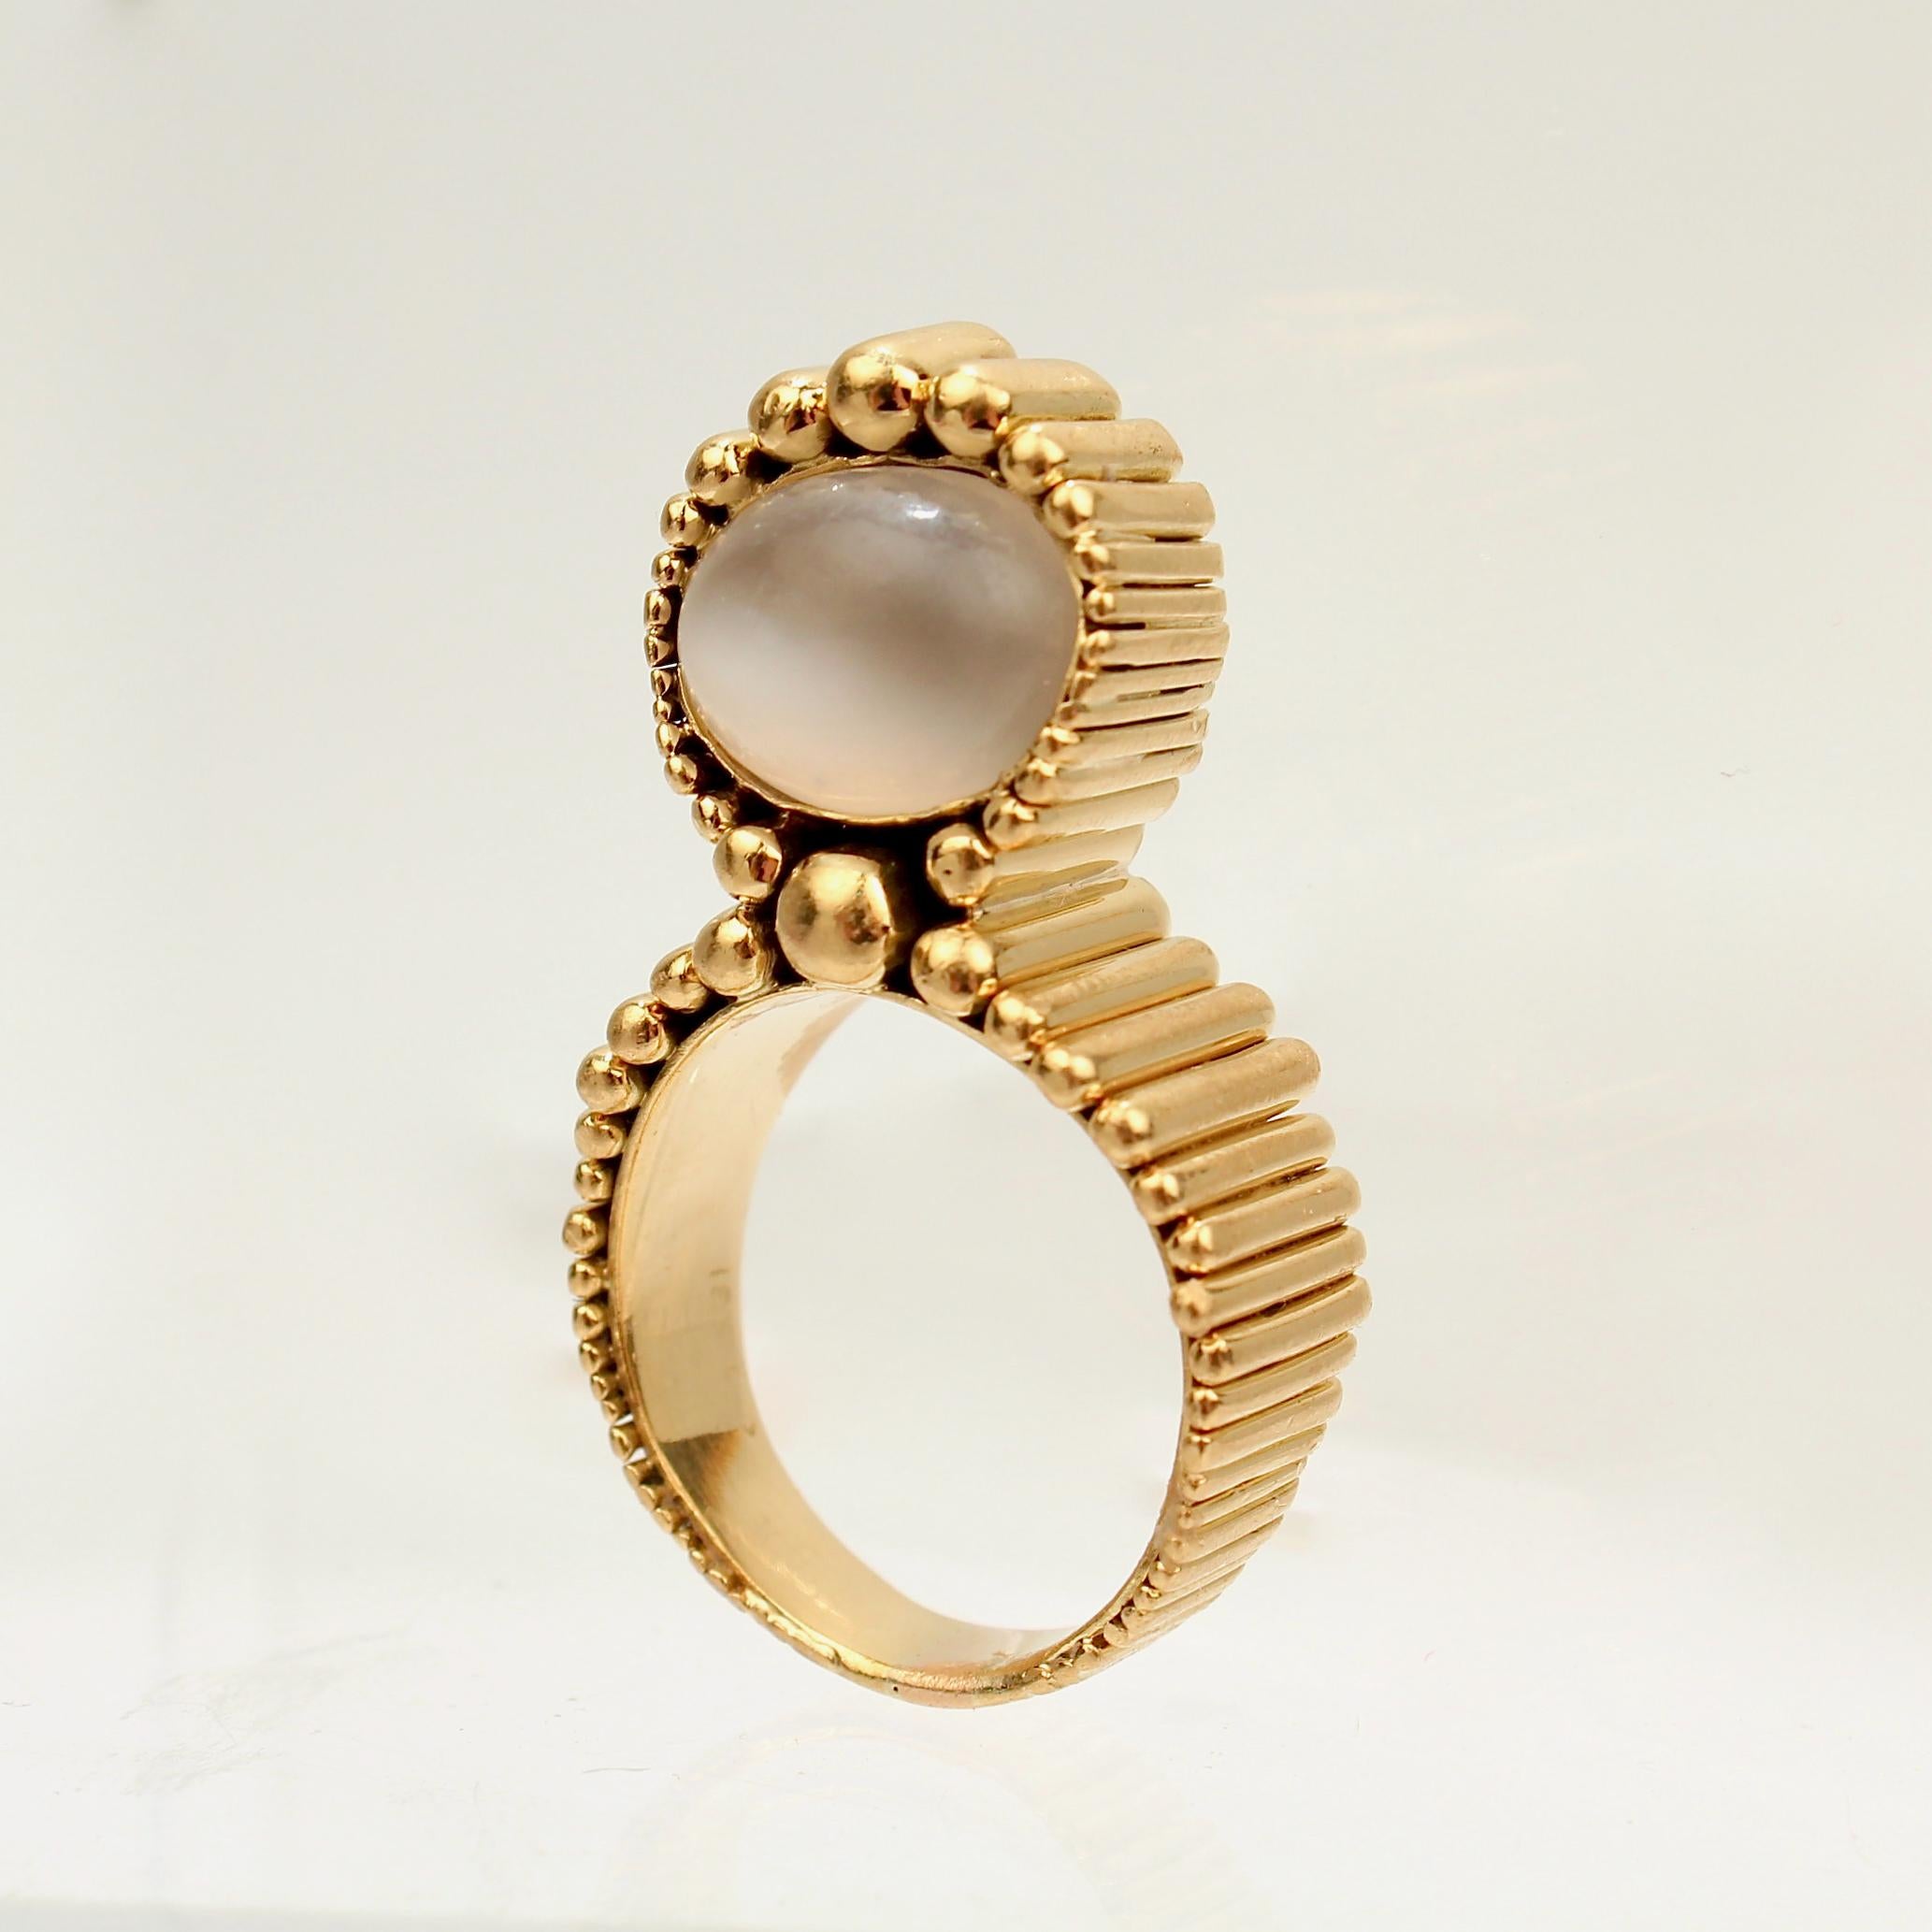 An incredible Space Age gold and moonstone ring.

Shaped as a 'figure 8' in 18k gold and set with a smooth oval, pebble shaped moonstone bead.

Designed by and marked for F. J. Cooper of Philadelphia. 

Simply amazing design at the intersection of